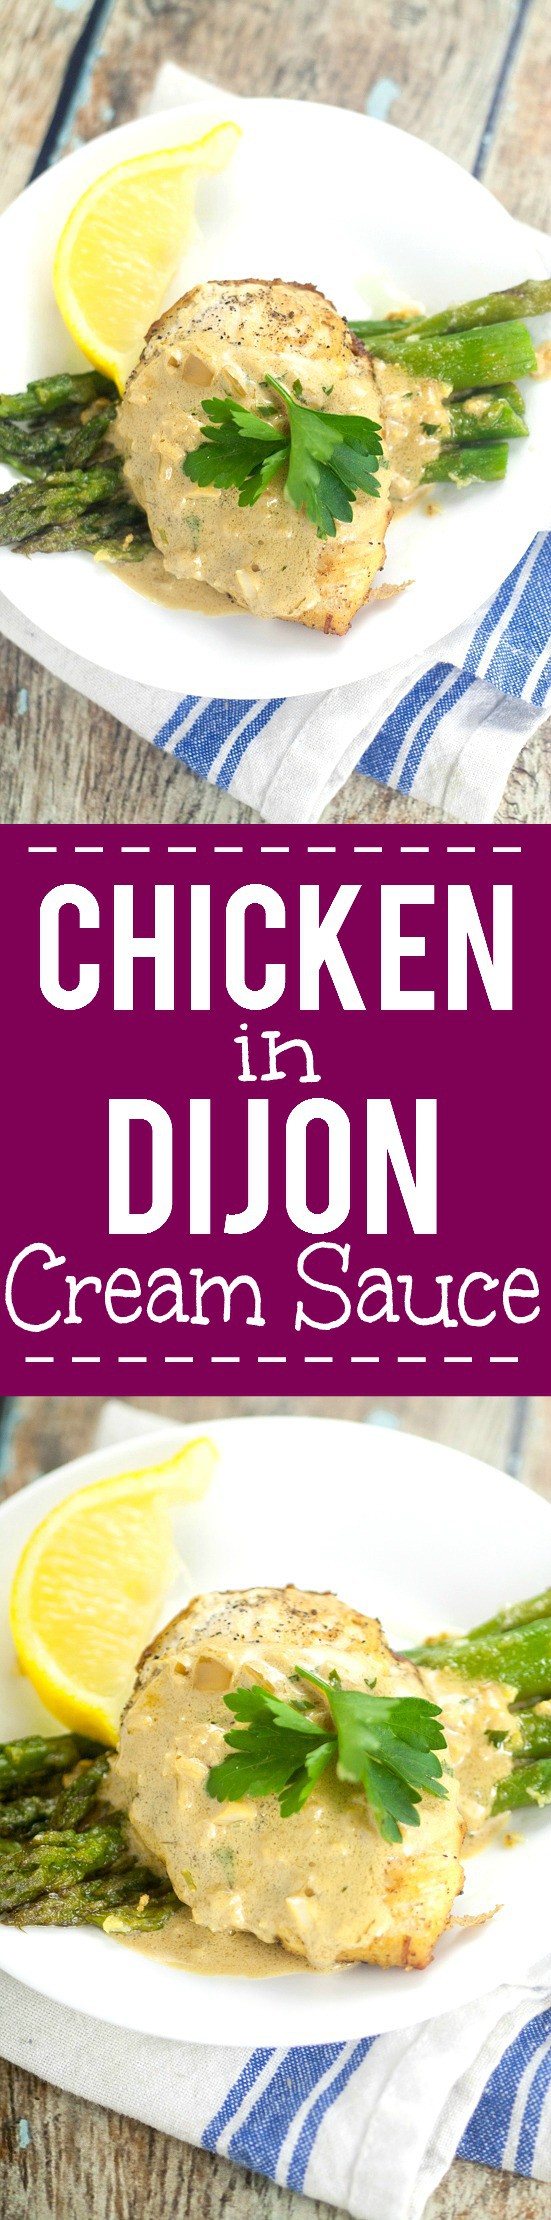 Skillet Chicken in Dijon Cream recipe - Creamy and tangy, this Skillet Chicken in Dijon Cream sauce recipe will make quick and easy dinner favorite with its simple ingredients and big flavor. Make the whole thing, top to bottom, in just 35 minutes! Simple, quick, and easy family dinner recipe and elegant enough for company.